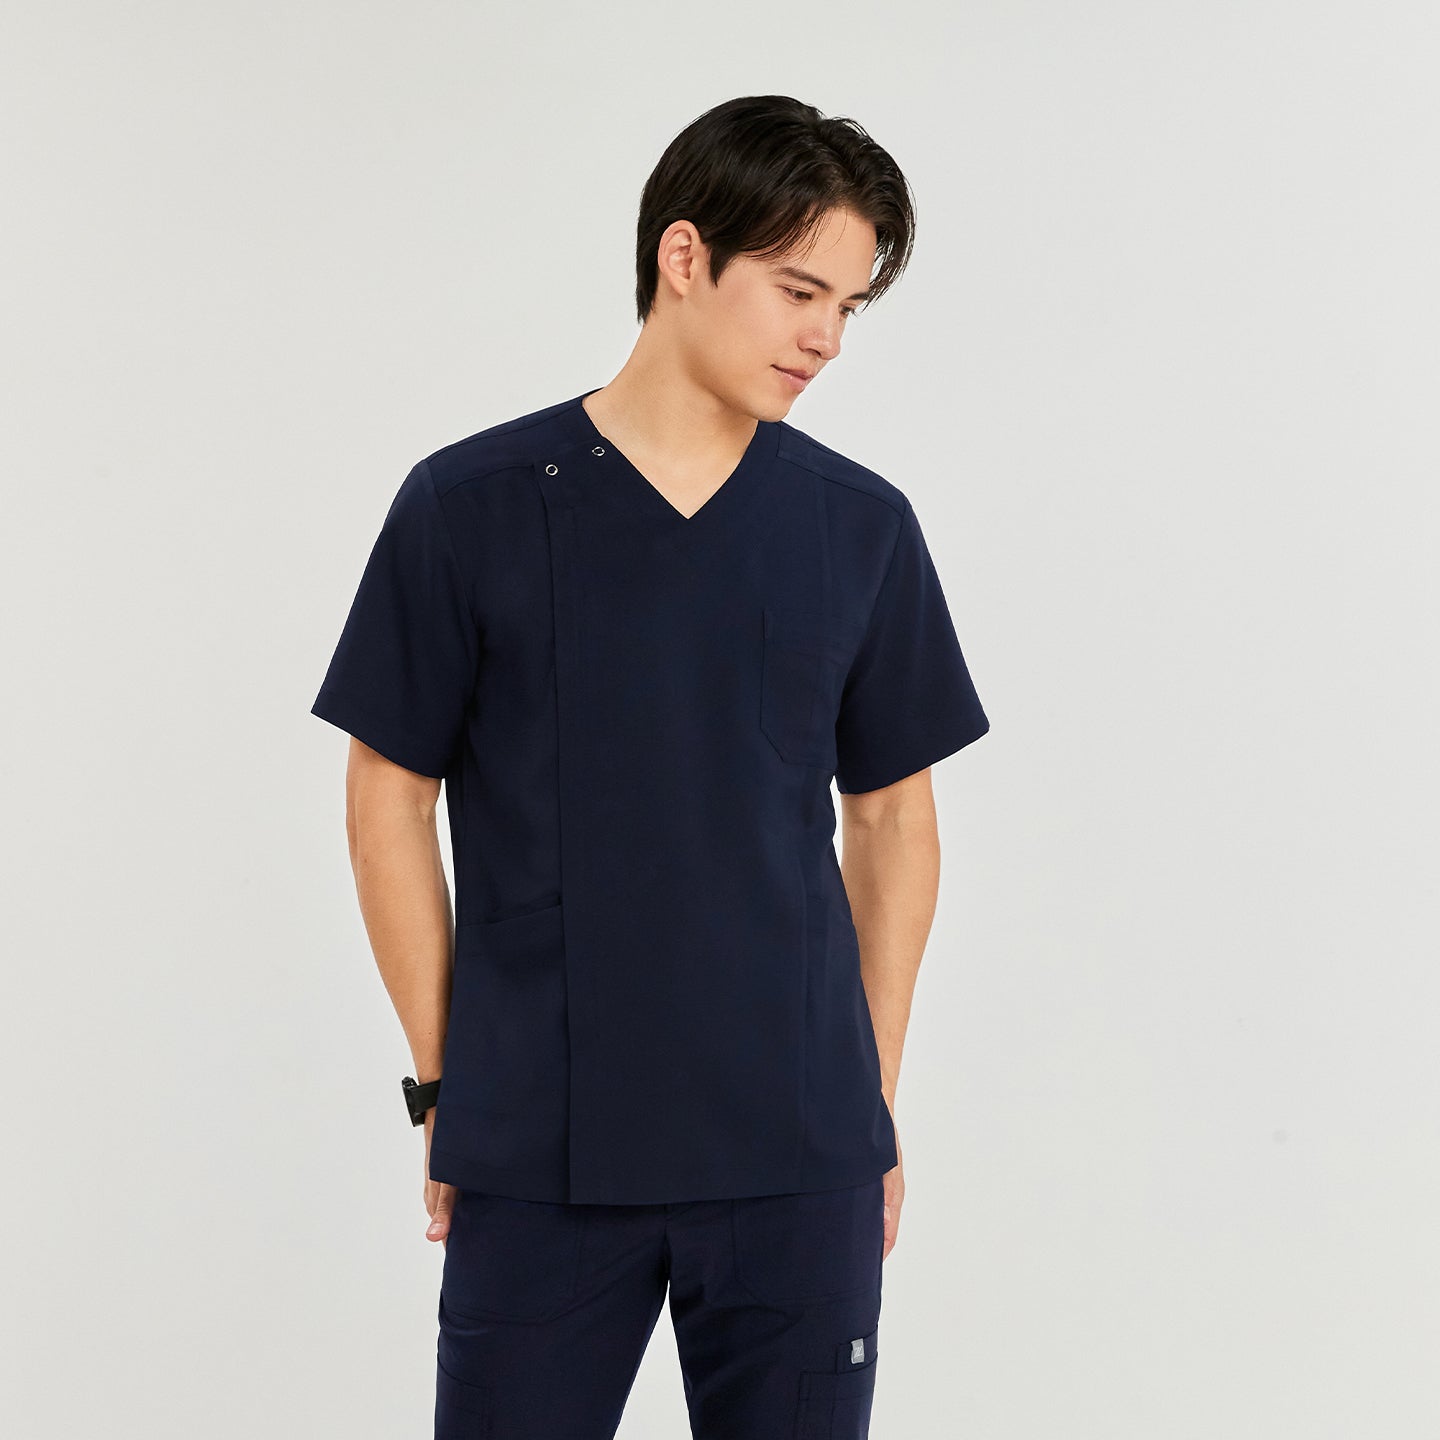 Man in a front zipper scrub top with chest and side pockets, matching straight-leg pants, looking to the side with hands in pockets,Navy